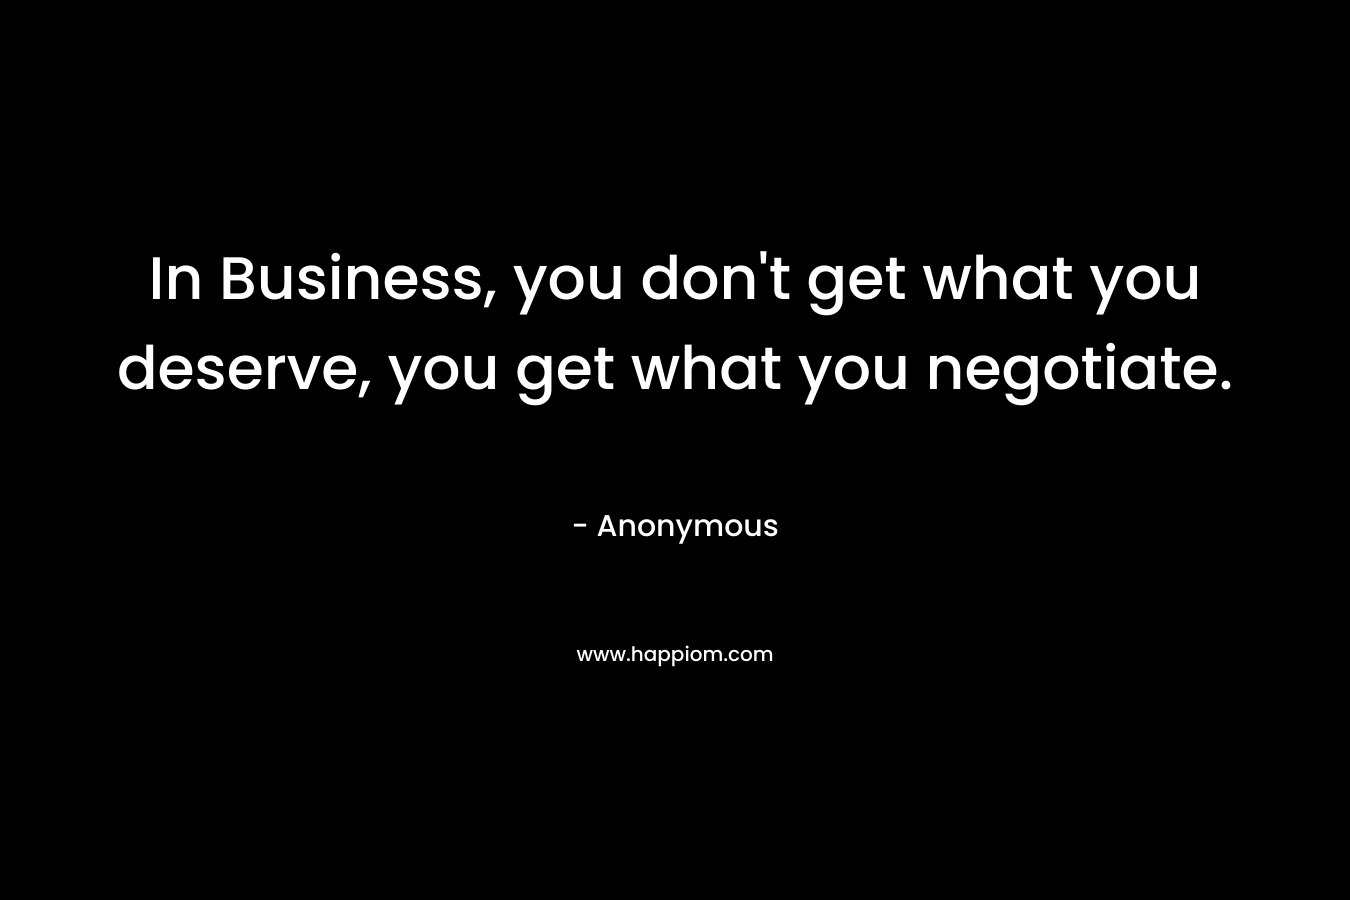 In Business, you don't get what you deserve, you get what you negotiate.